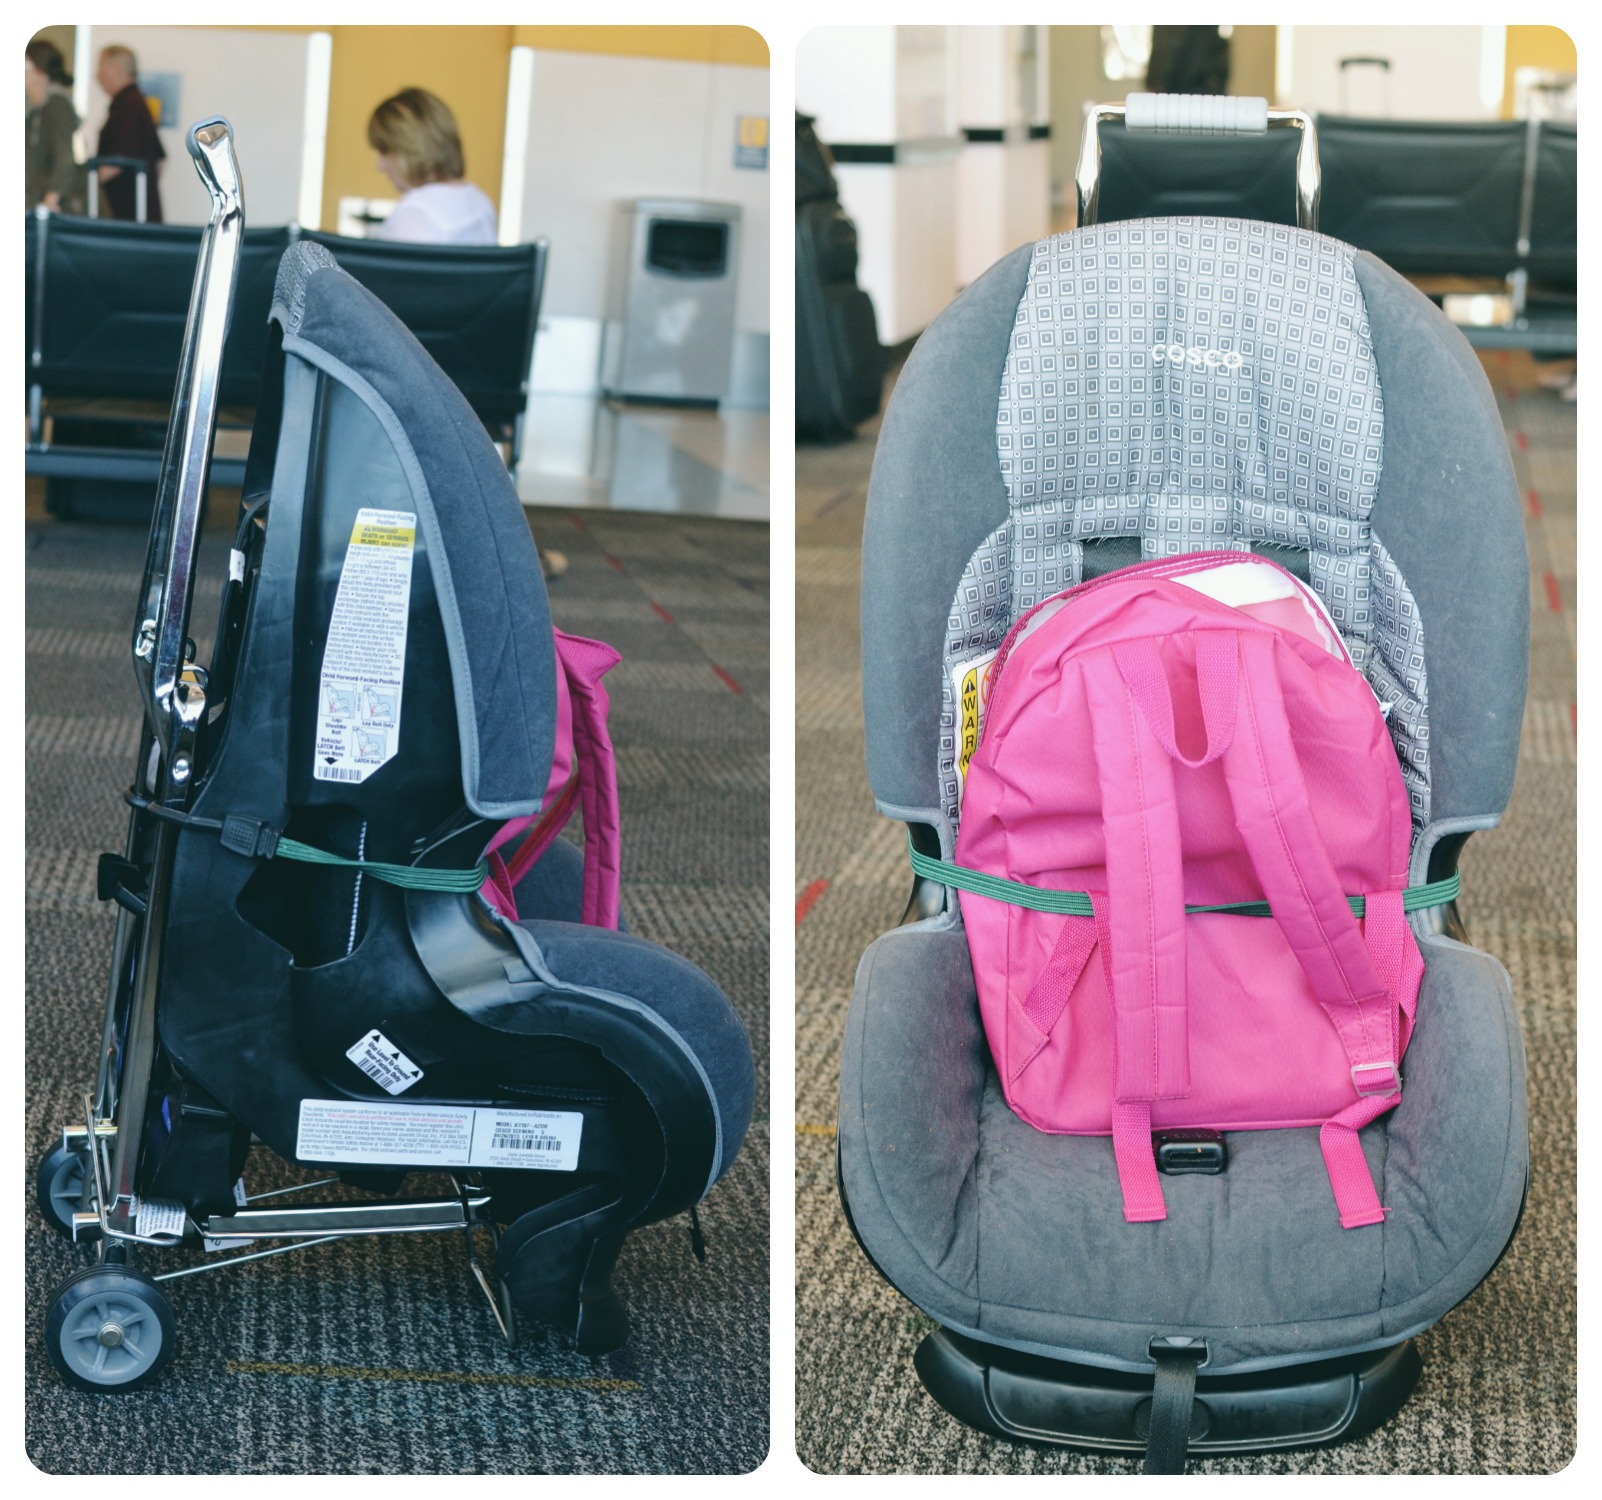 Traveling With Car Seats In The Airport, Airport Car Seat Stroller Travel Cart